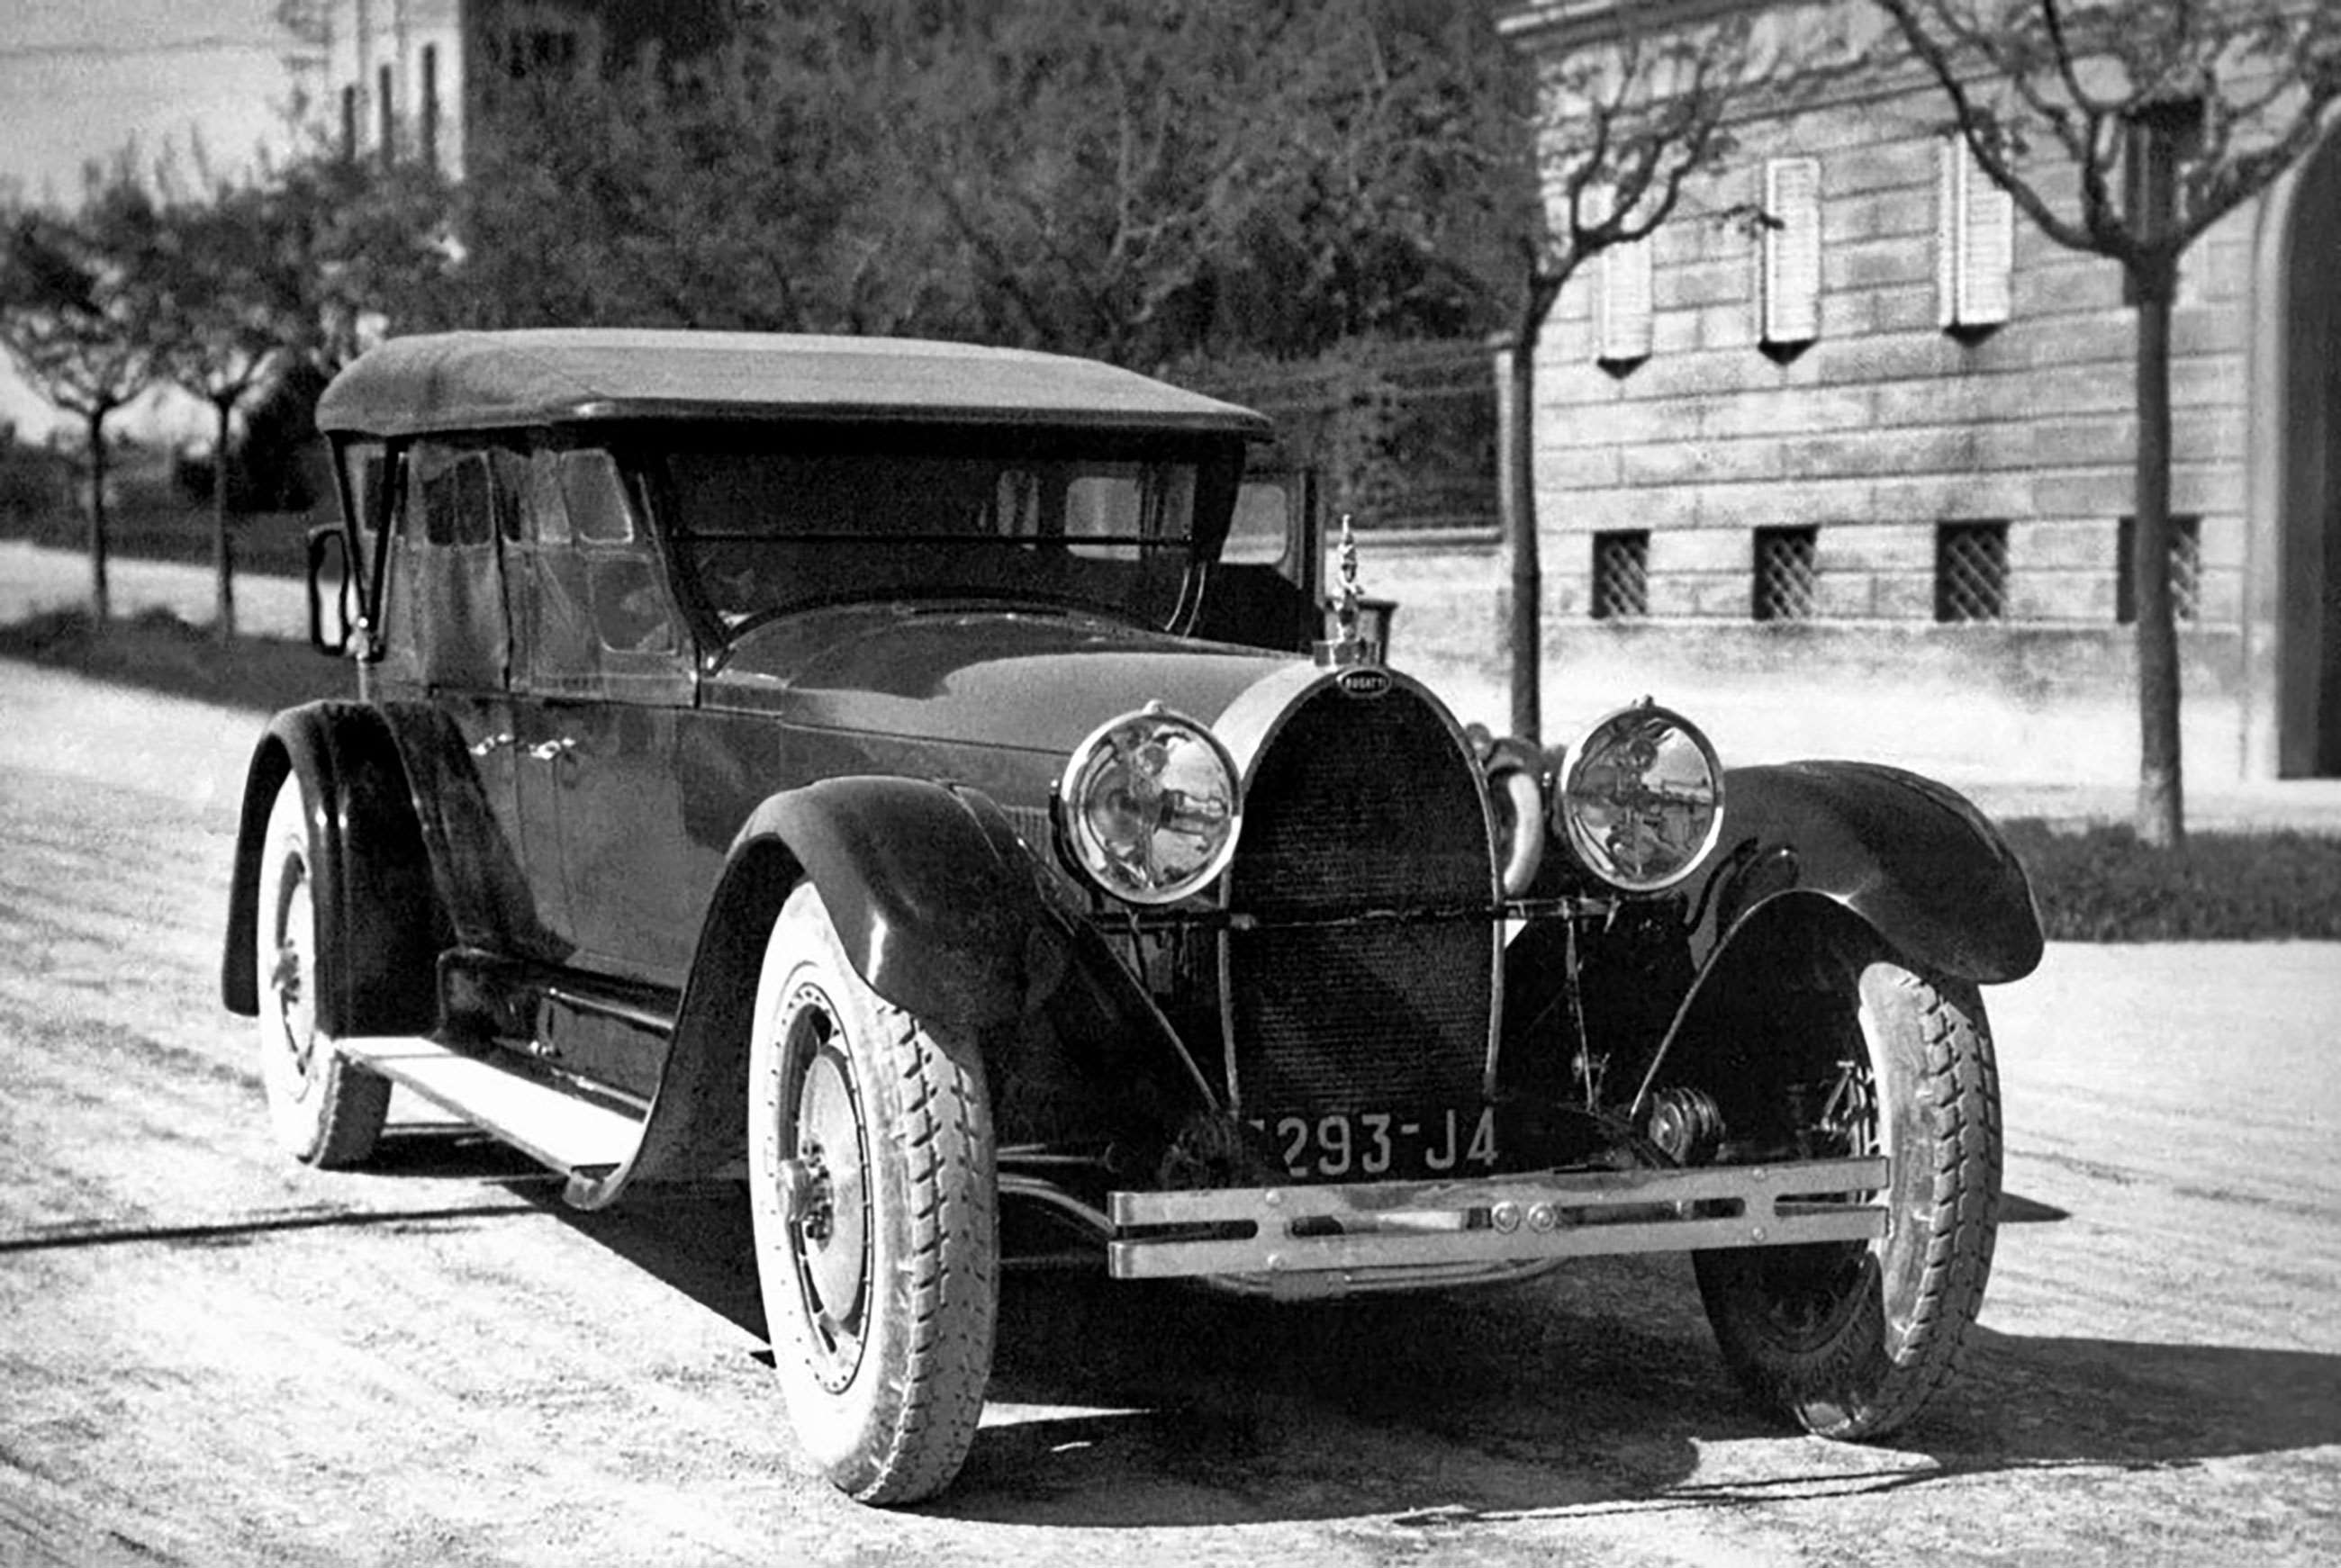 road-cars-with-giant-engines-8-bugatti-royale-type-41-goodwood-26052020.jpg